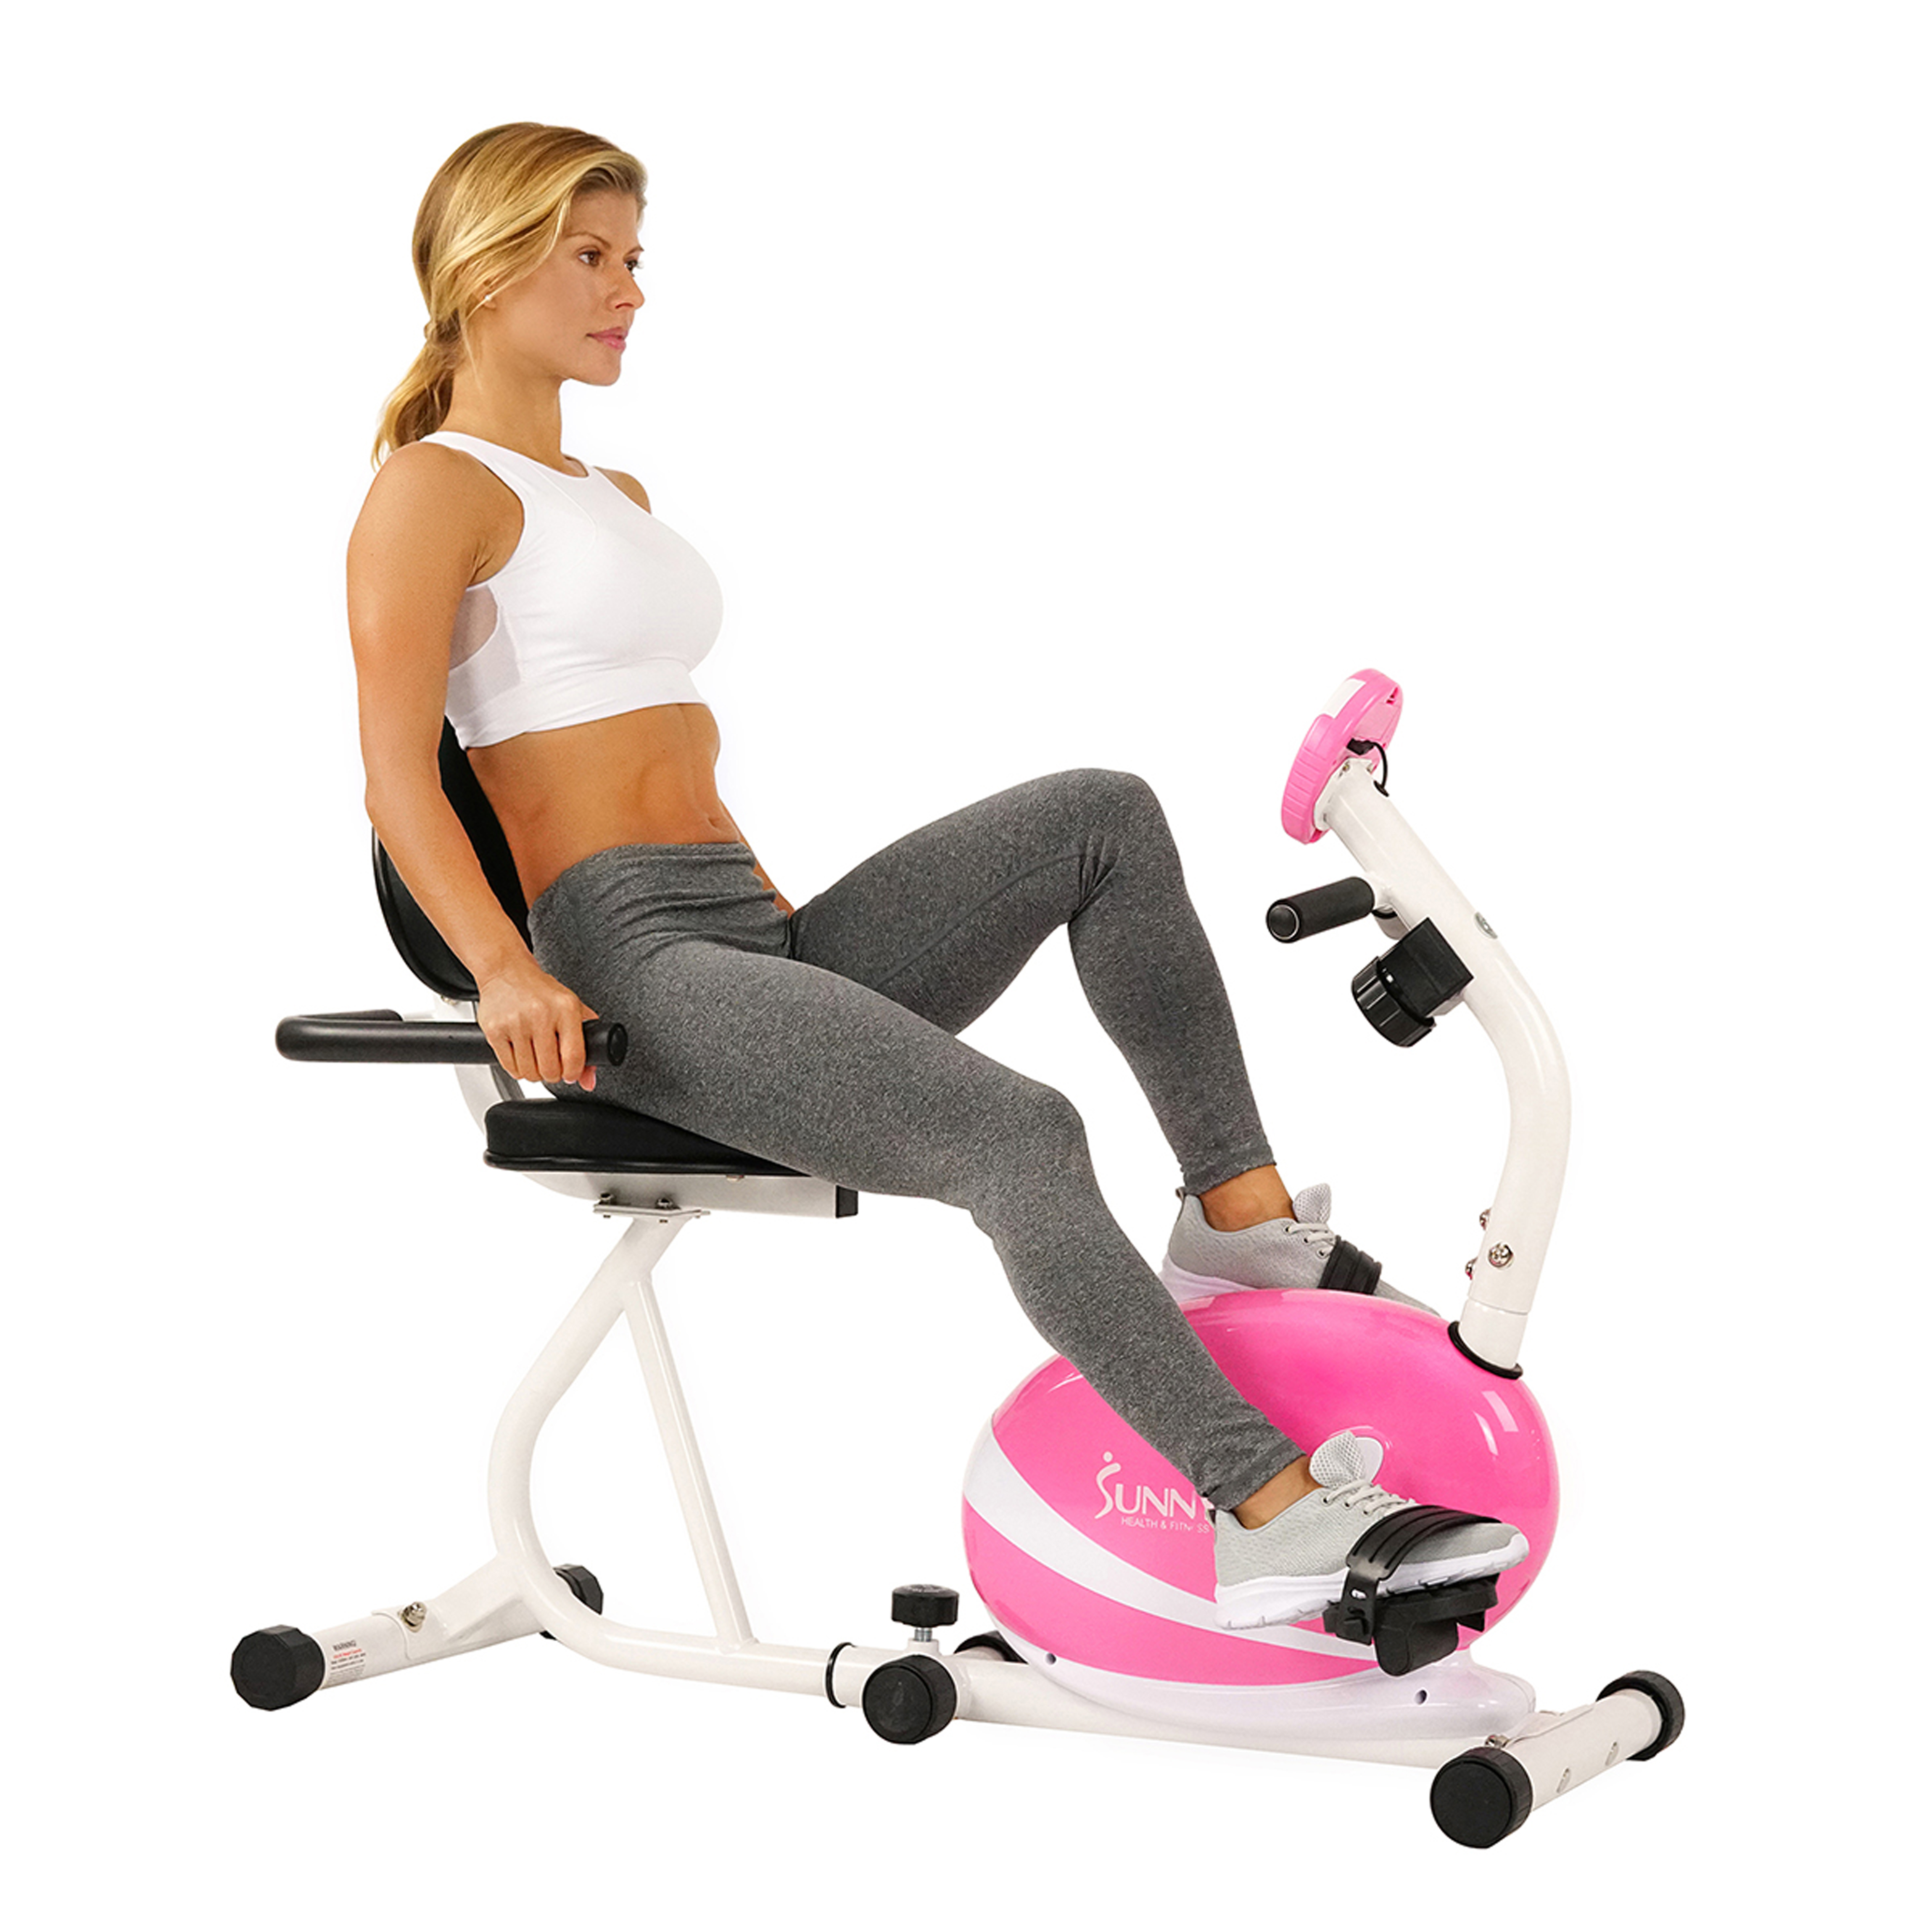 Sunny Health & Fitness Magnetic Stationary Recumbent Exercise Bike, 220 lb Capacity, LCD Monitor, and Pulse Rate Sensor, P8400 - image 6 of 9